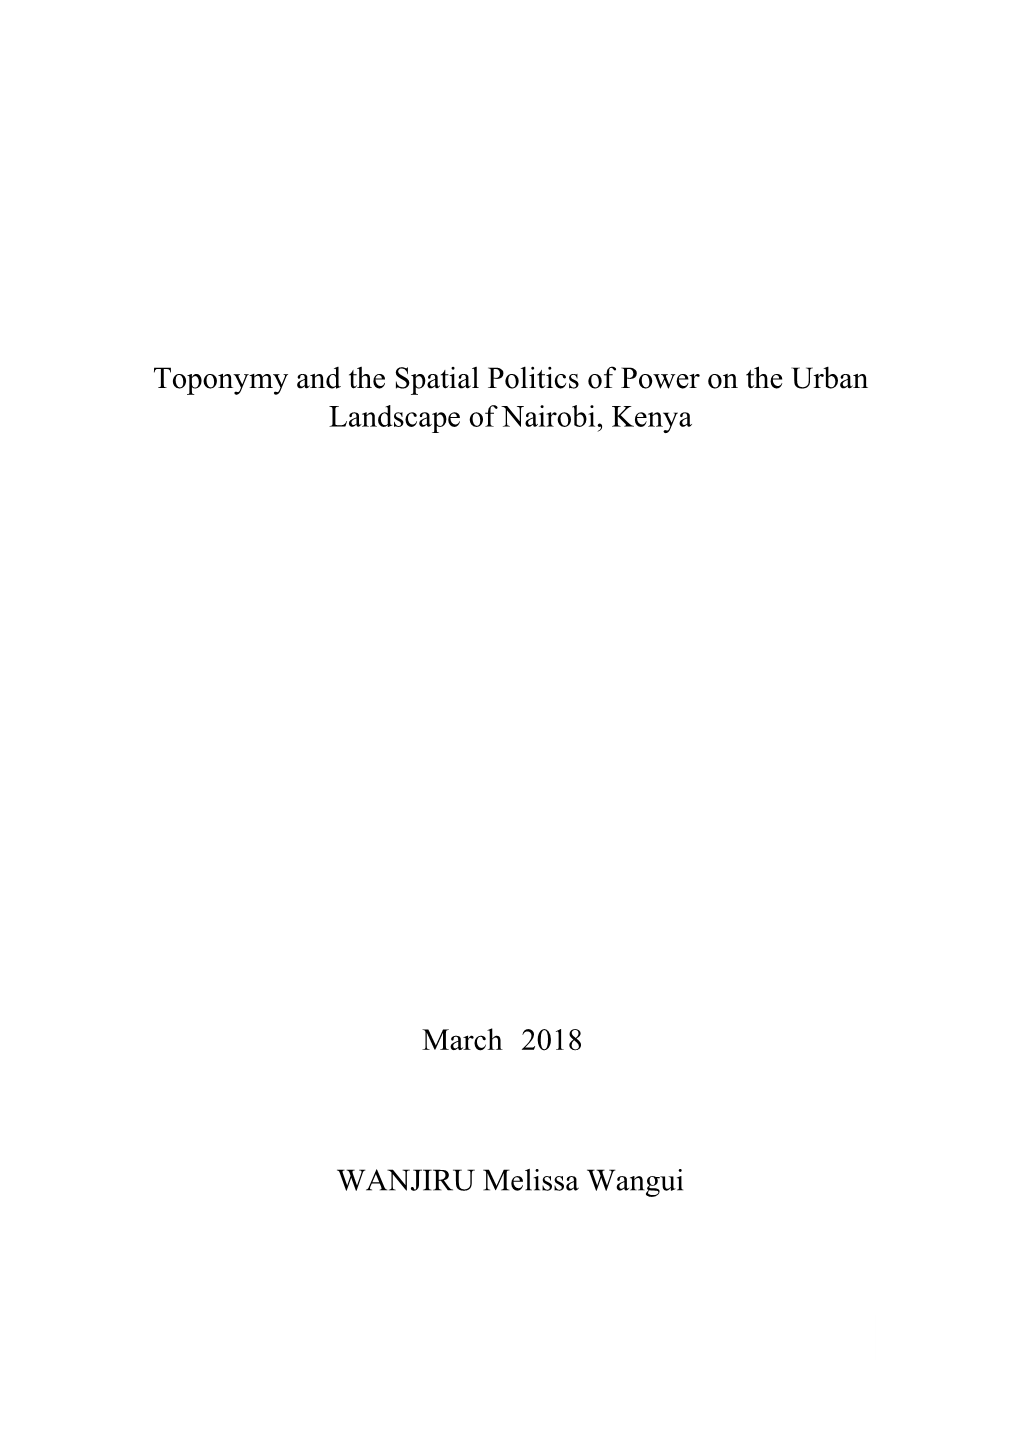 Toponymy and the Spatial Politics of Power on the Urban Landscape of Nairobi, Kenya